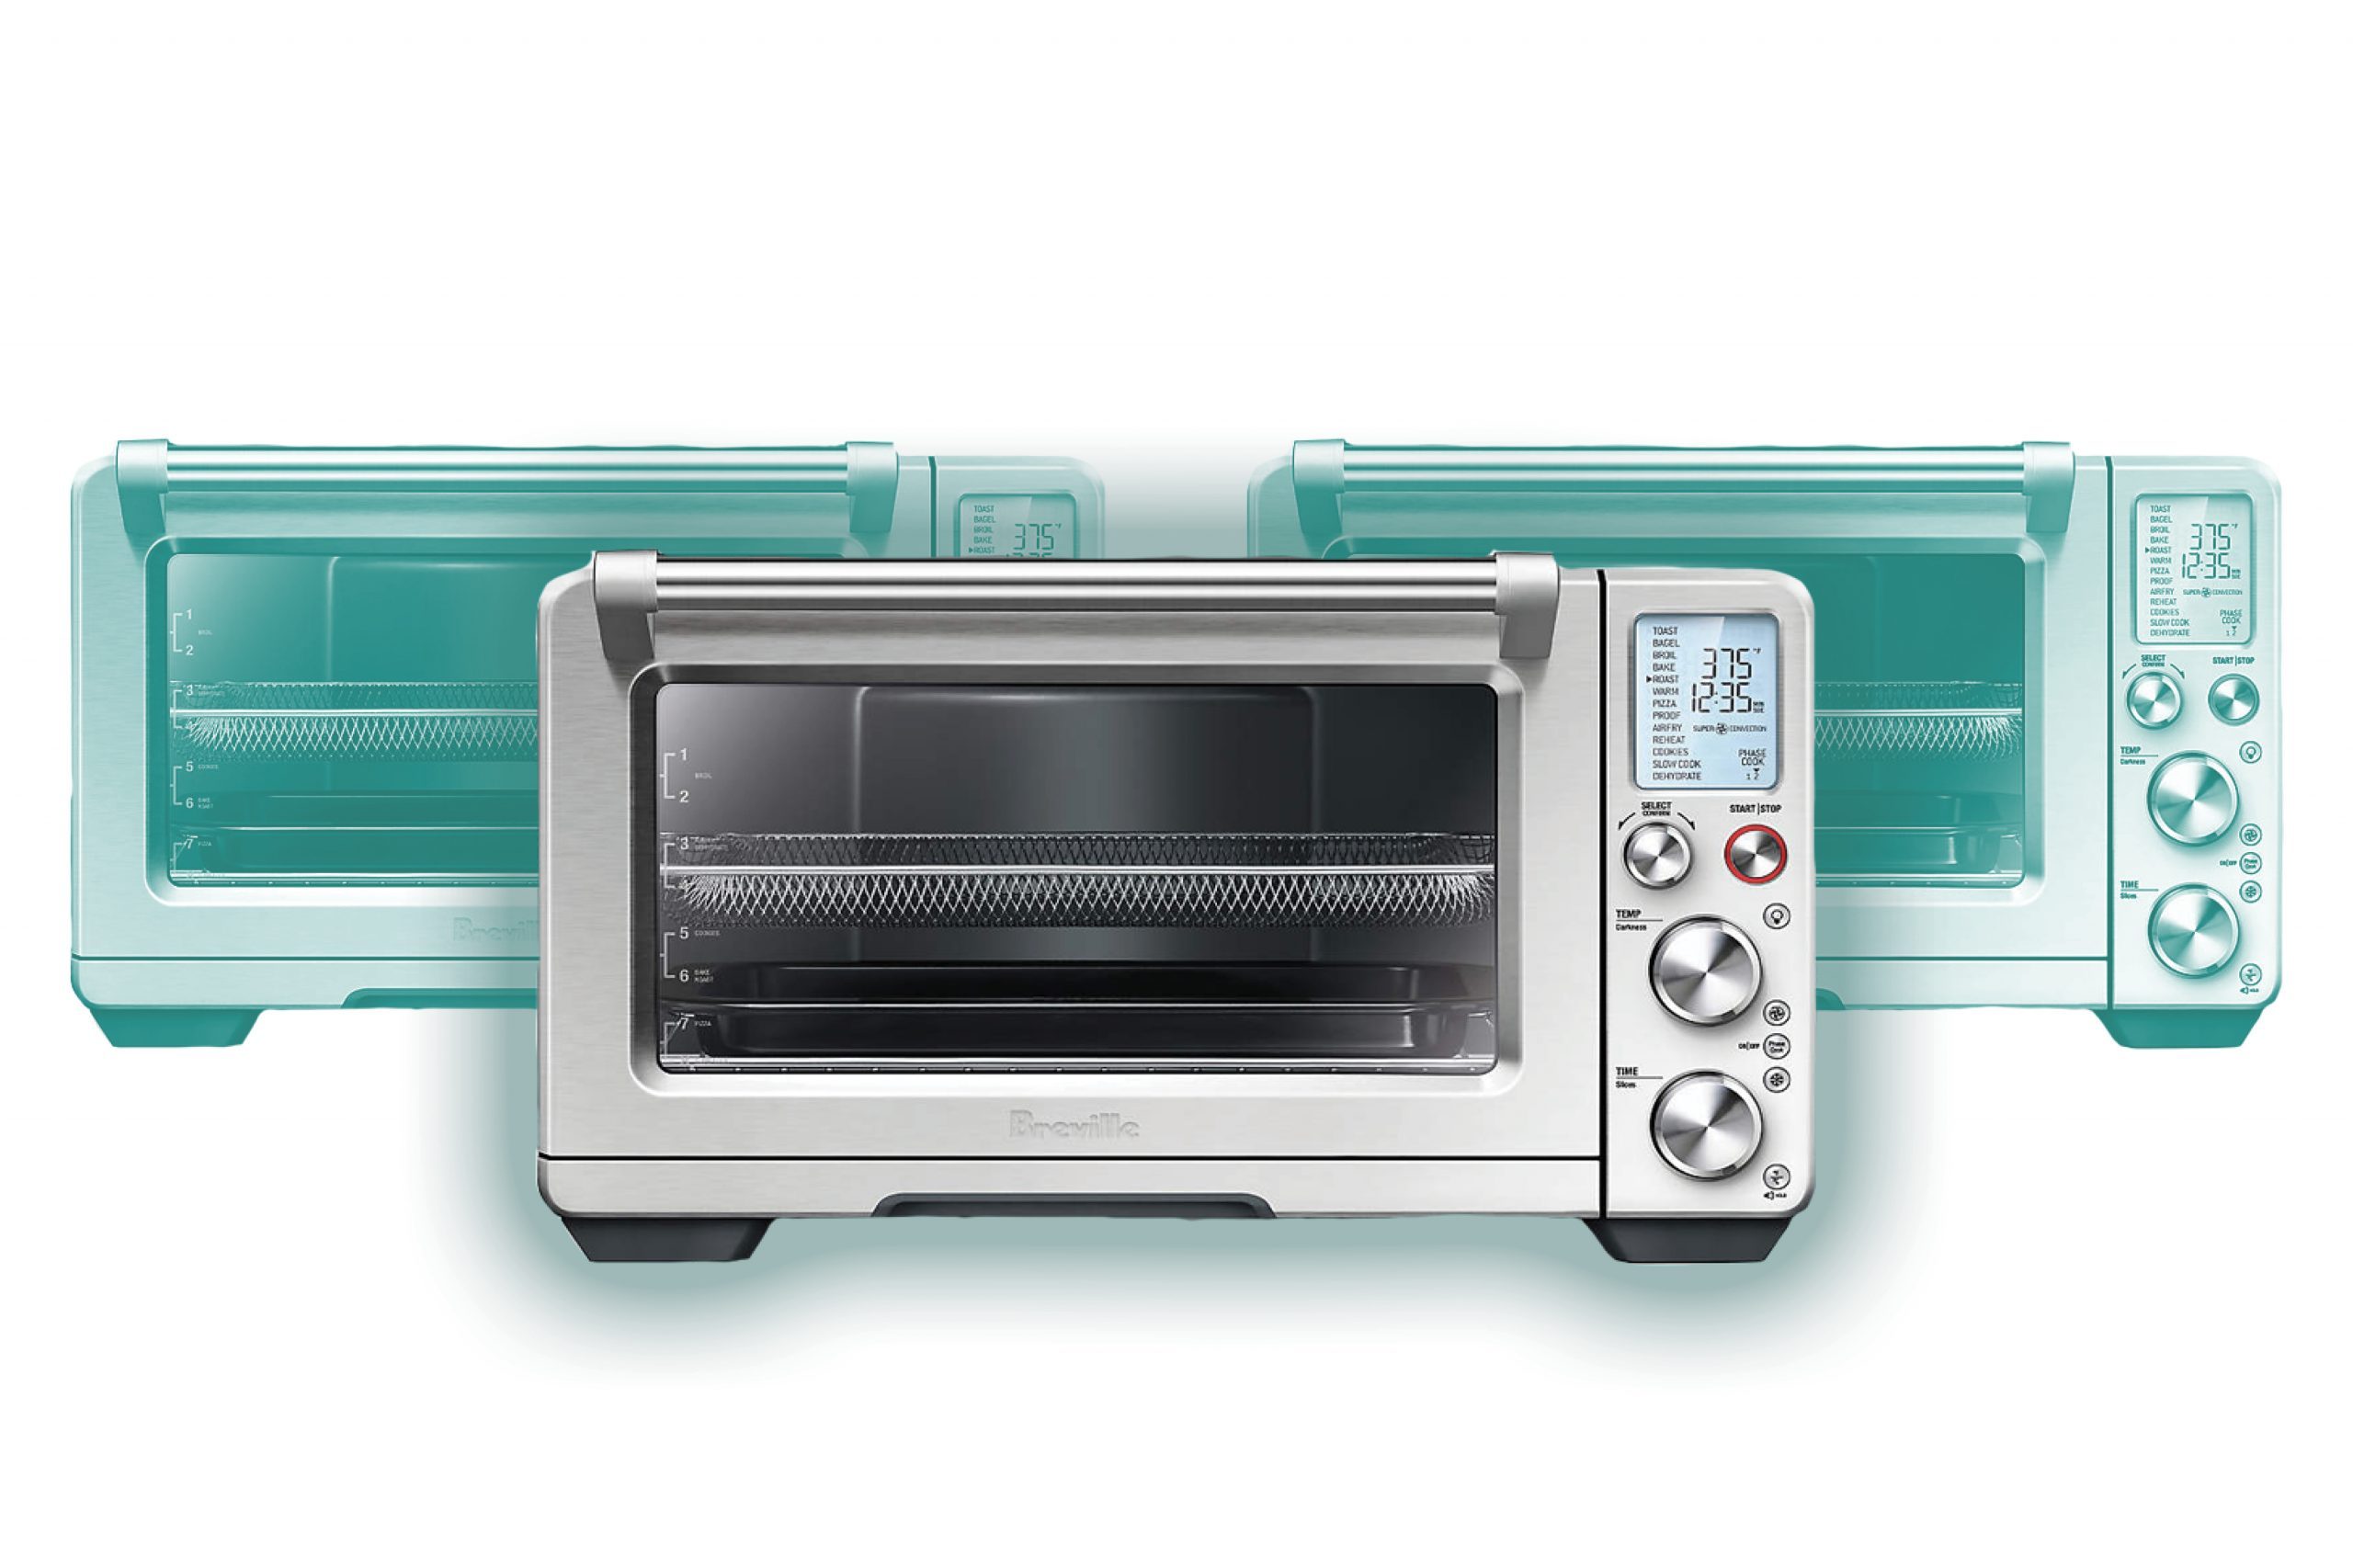 The Best Countertop Oven to Give (or Get) This Year